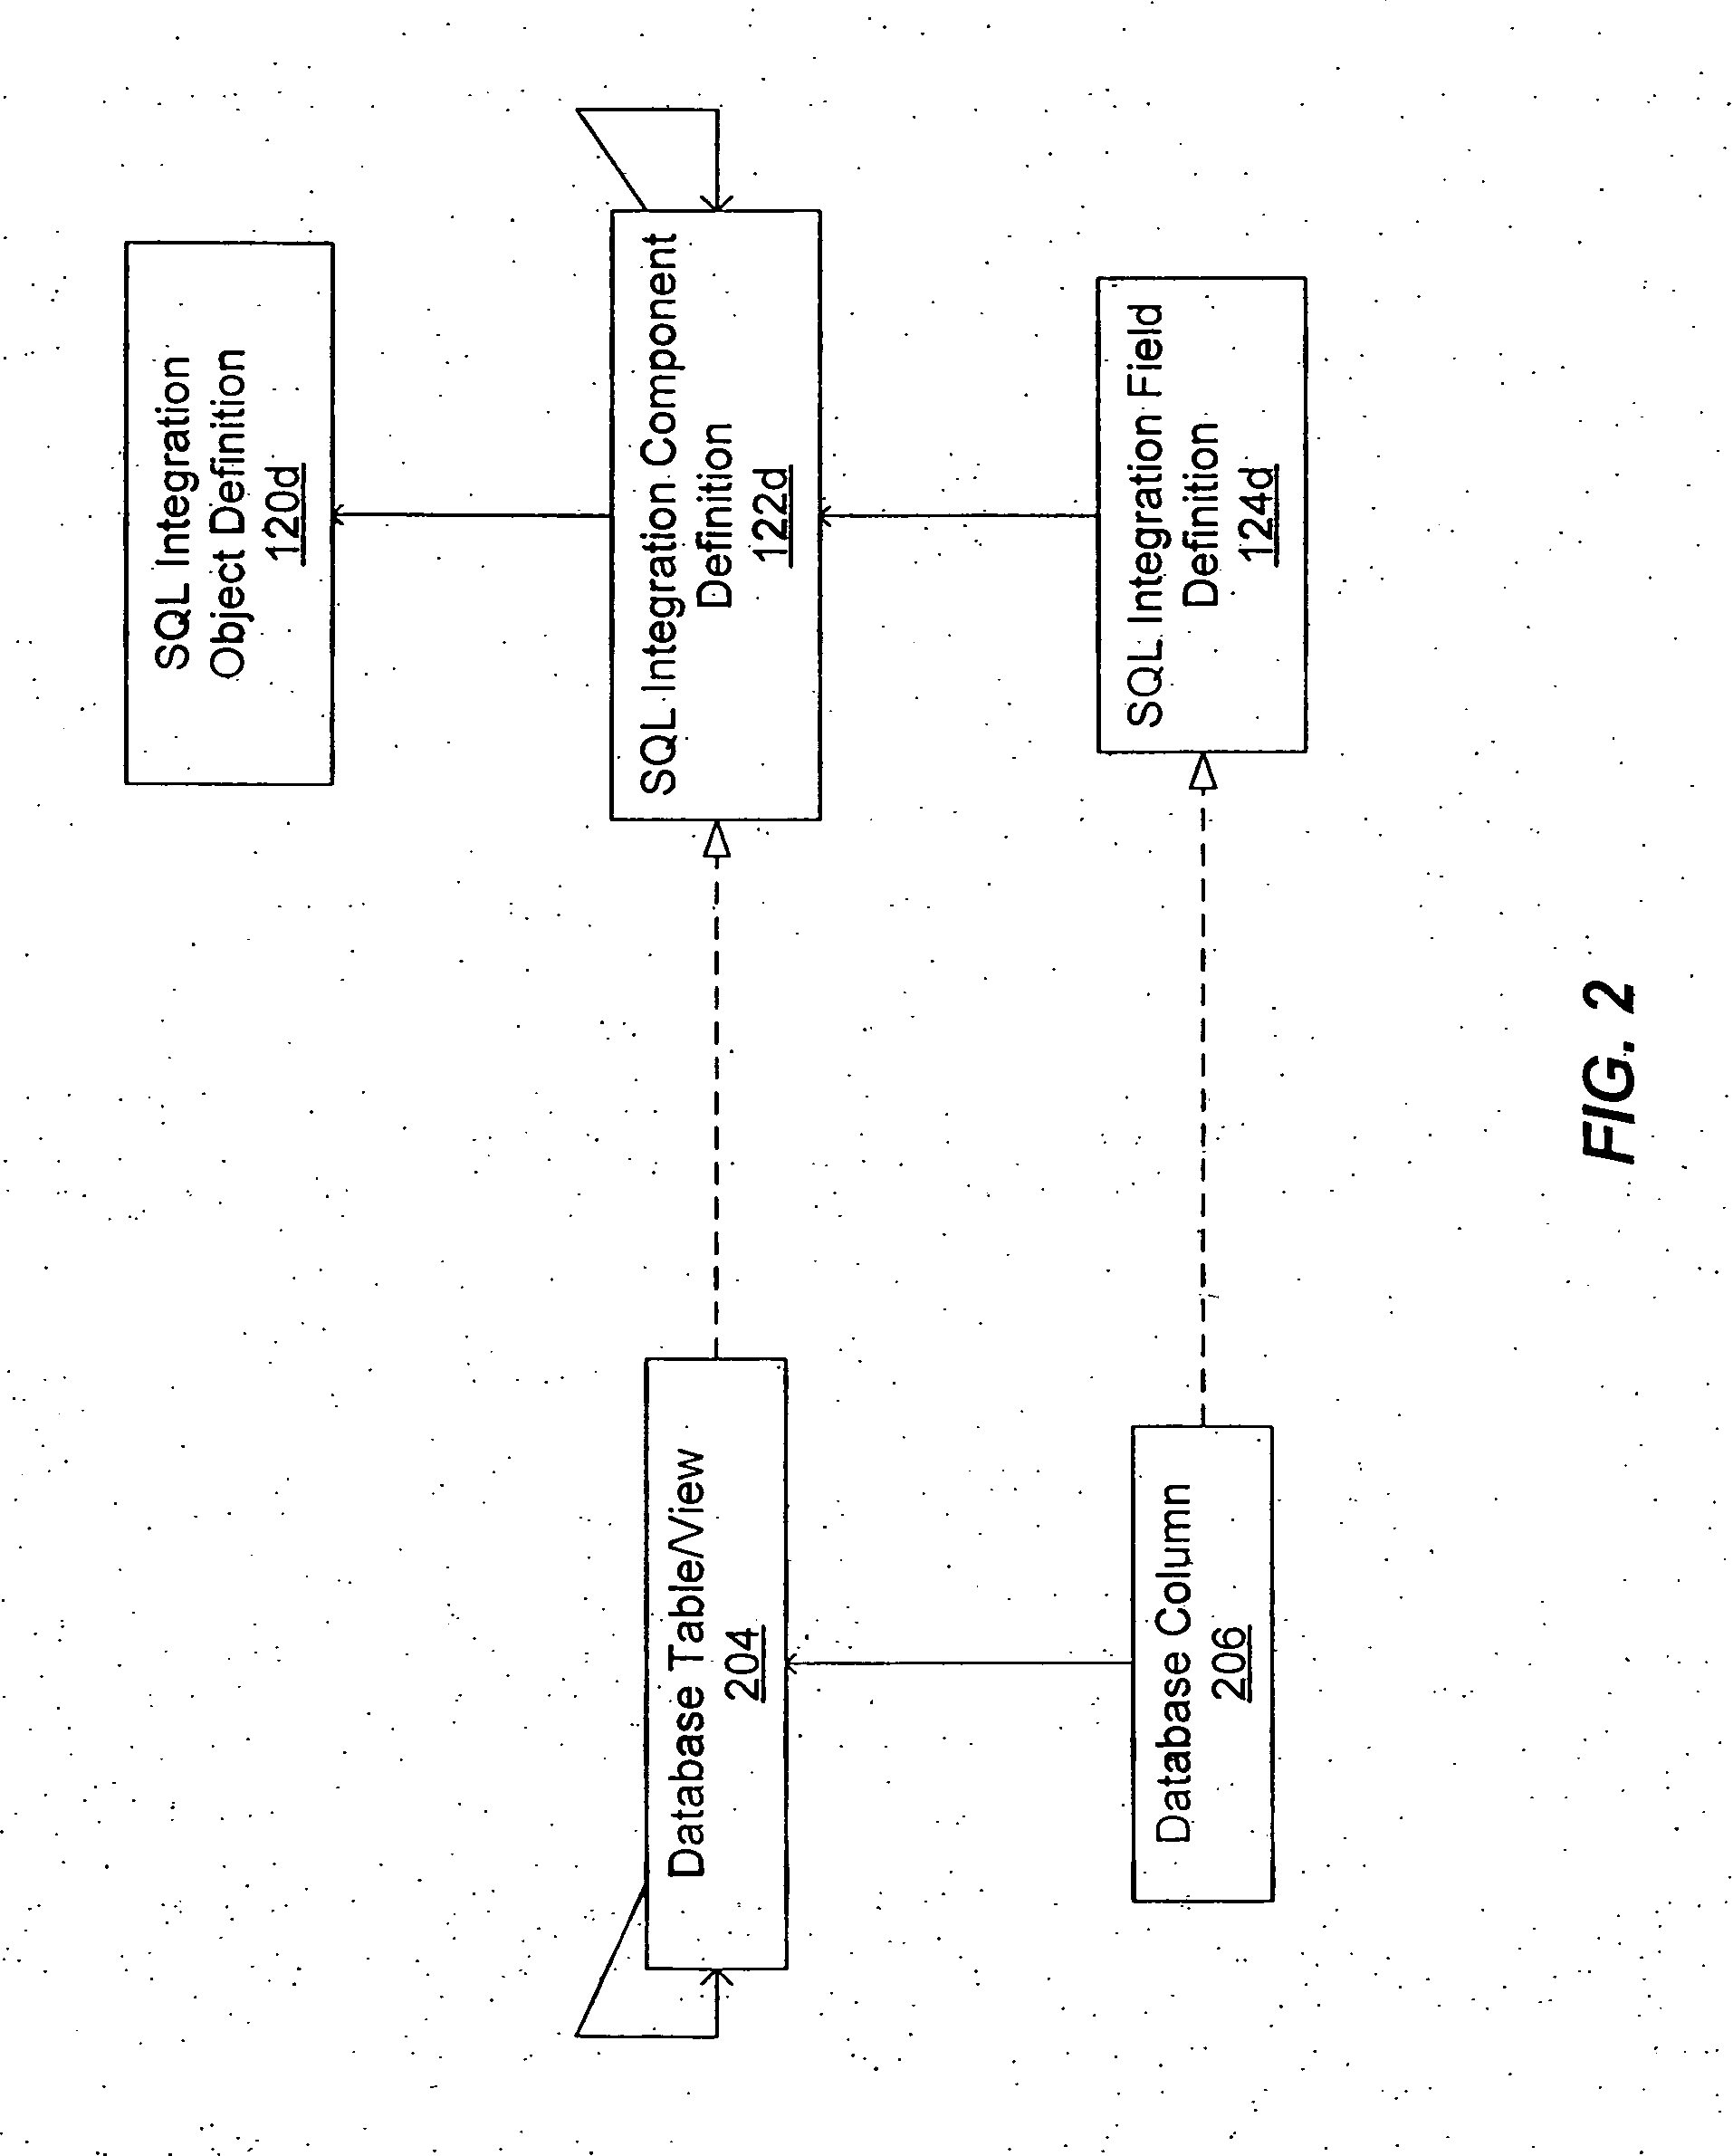 Method and System for an Operation Capable of Updating and Inserting Information in a Database